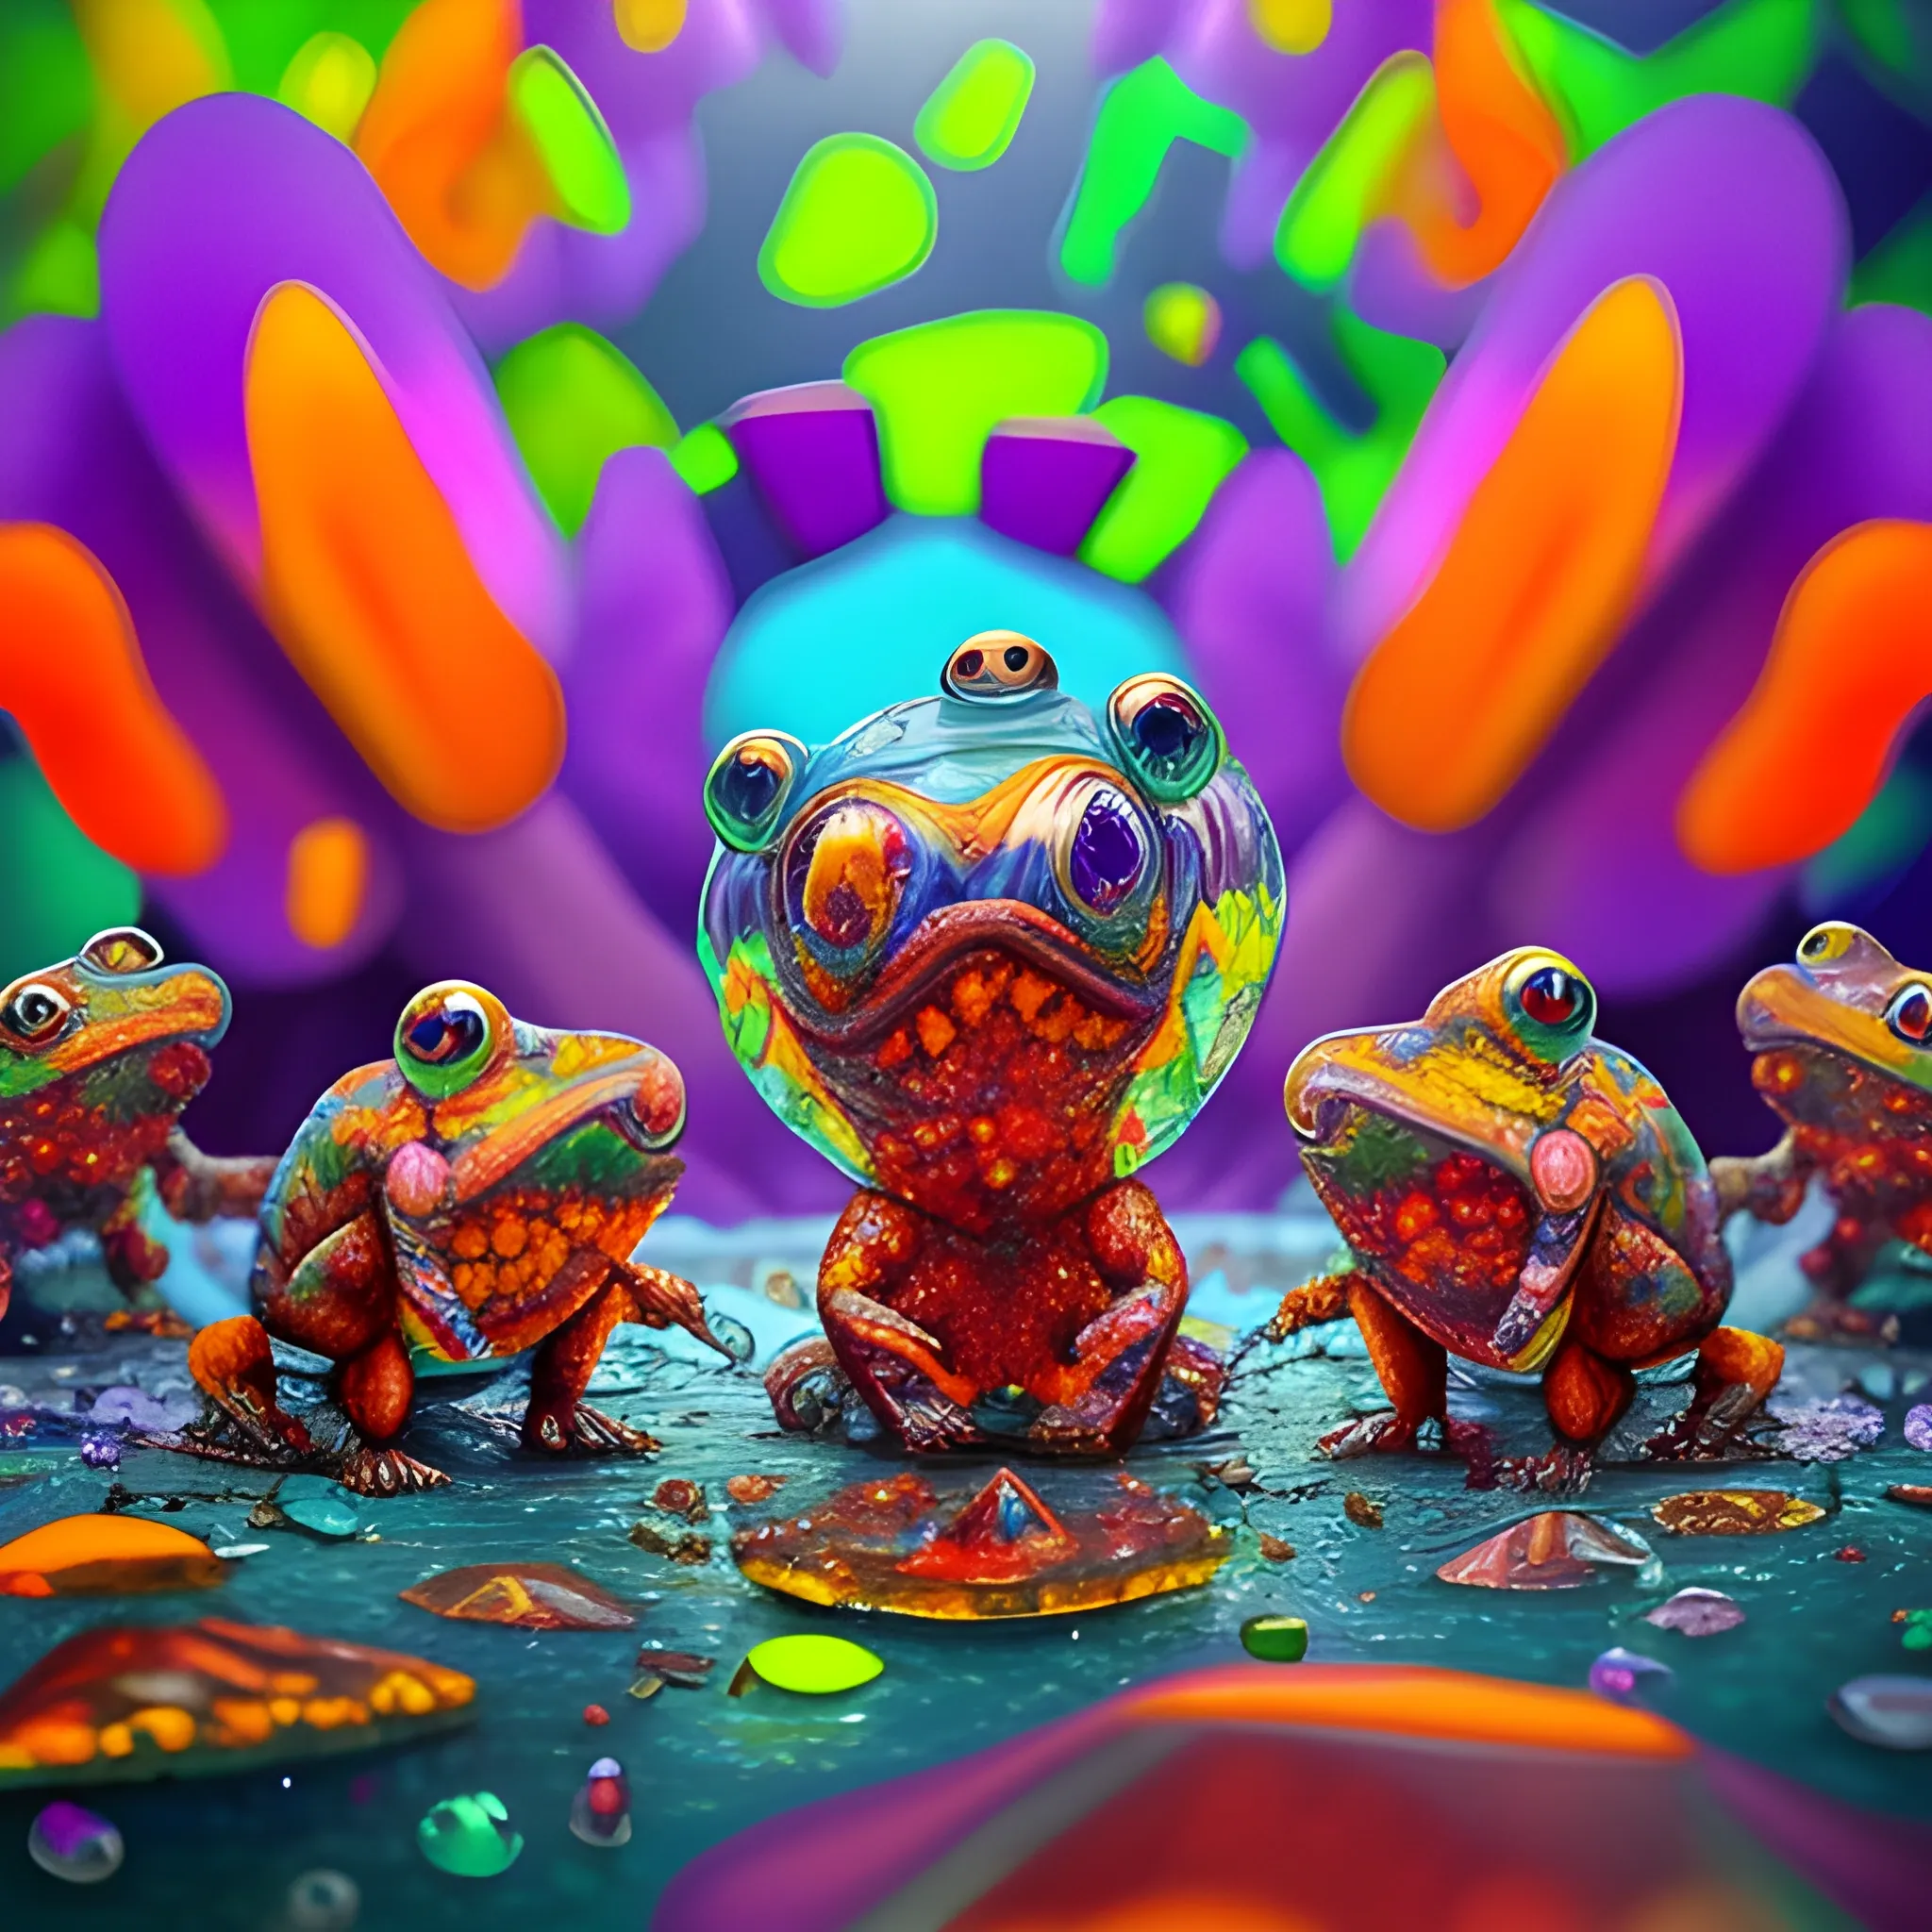 make a sculpture of many crystal crazy frogs, poppies around, many broken glass in the air, saturated colors
surrealism, chaotic background, 3D, Trippy,  eerie atmosphere, close up, Oil Painting, perspective six vanishing points